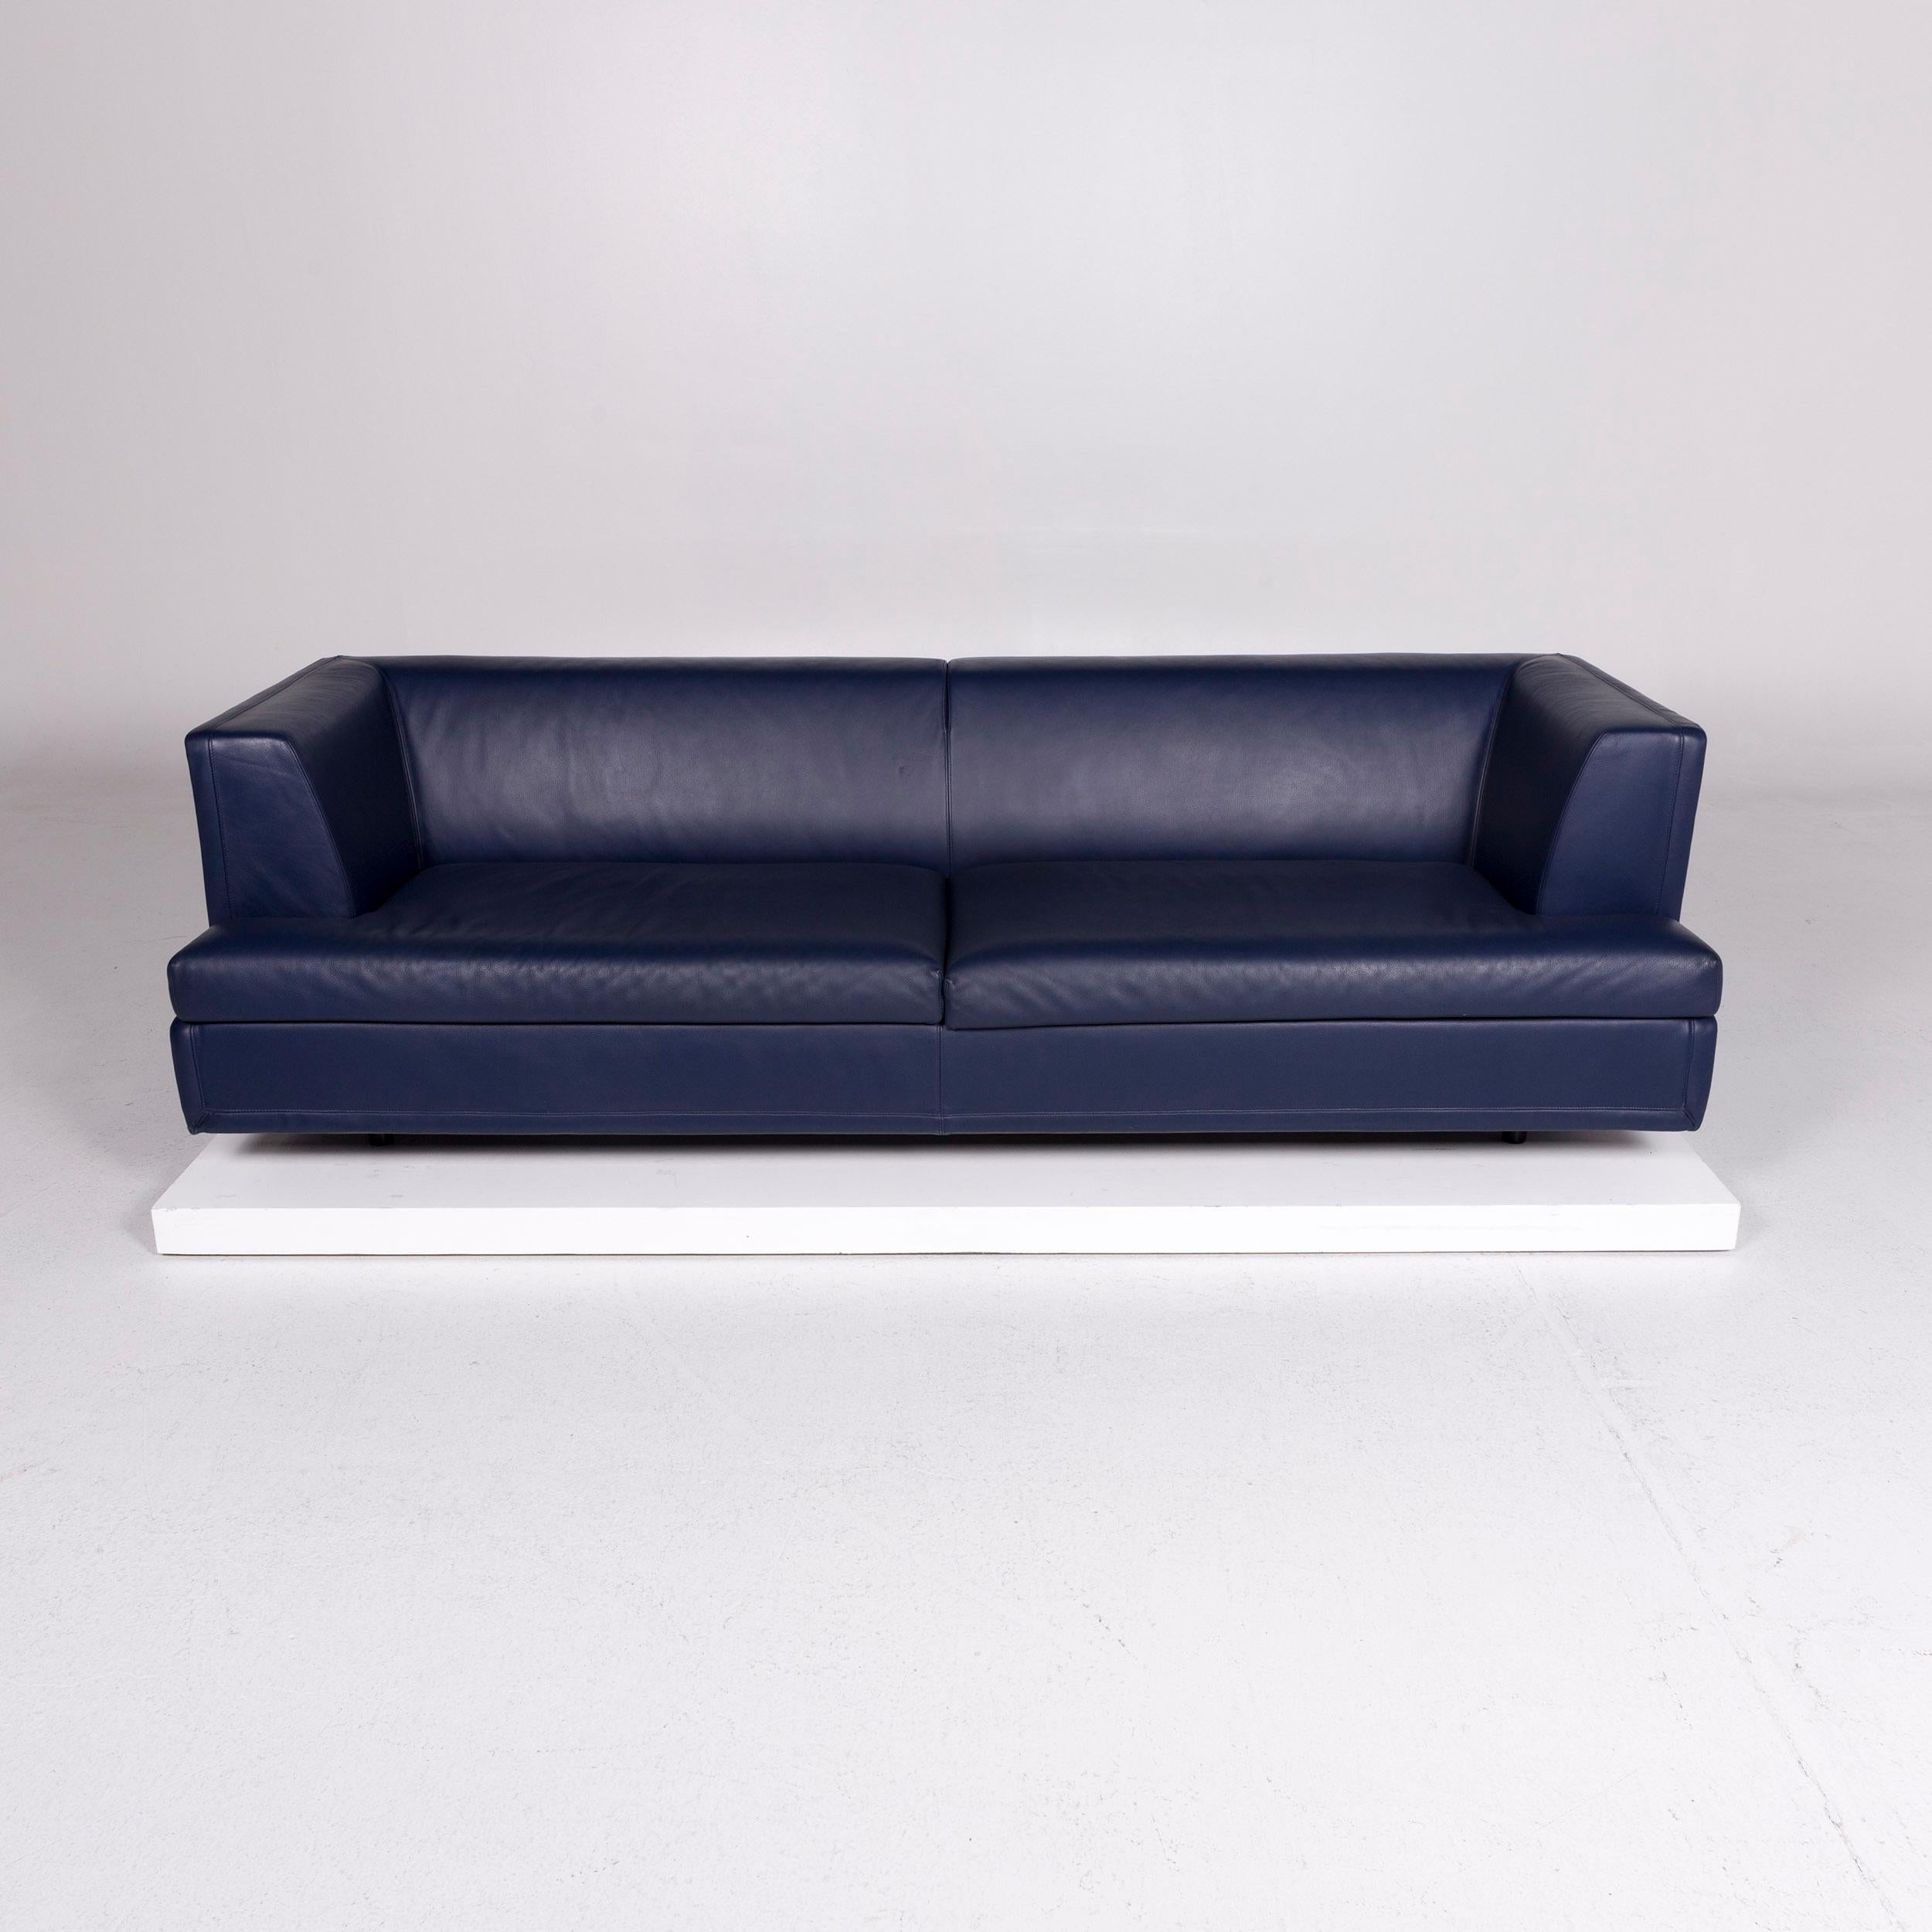 Wittmann La Scala Leather Sofa Set Blue 1 Three-Seat 1 Two-Seat 1 In Good Condition For Sale In Cologne, DE